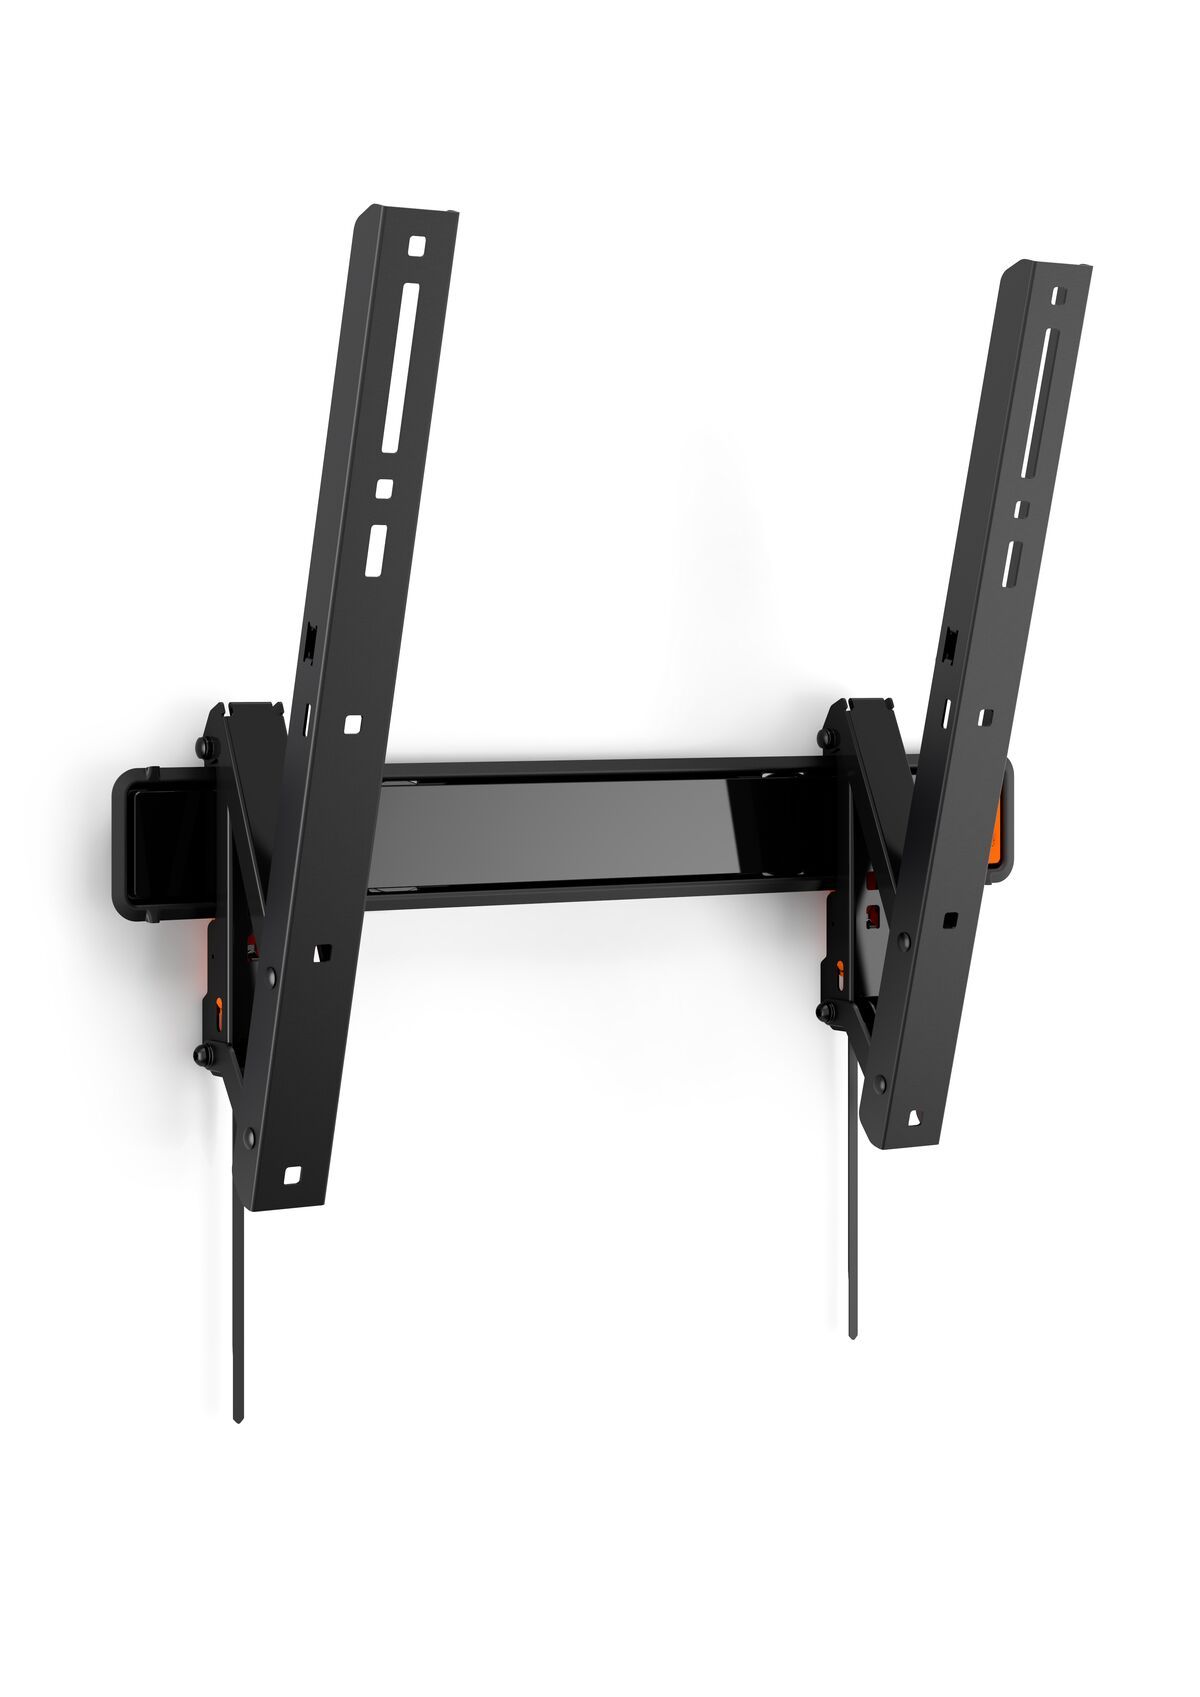 Vogel's W50710 Tilting TV Wall Mount - Suitable for 32 up to 55 inch TVs up to Product